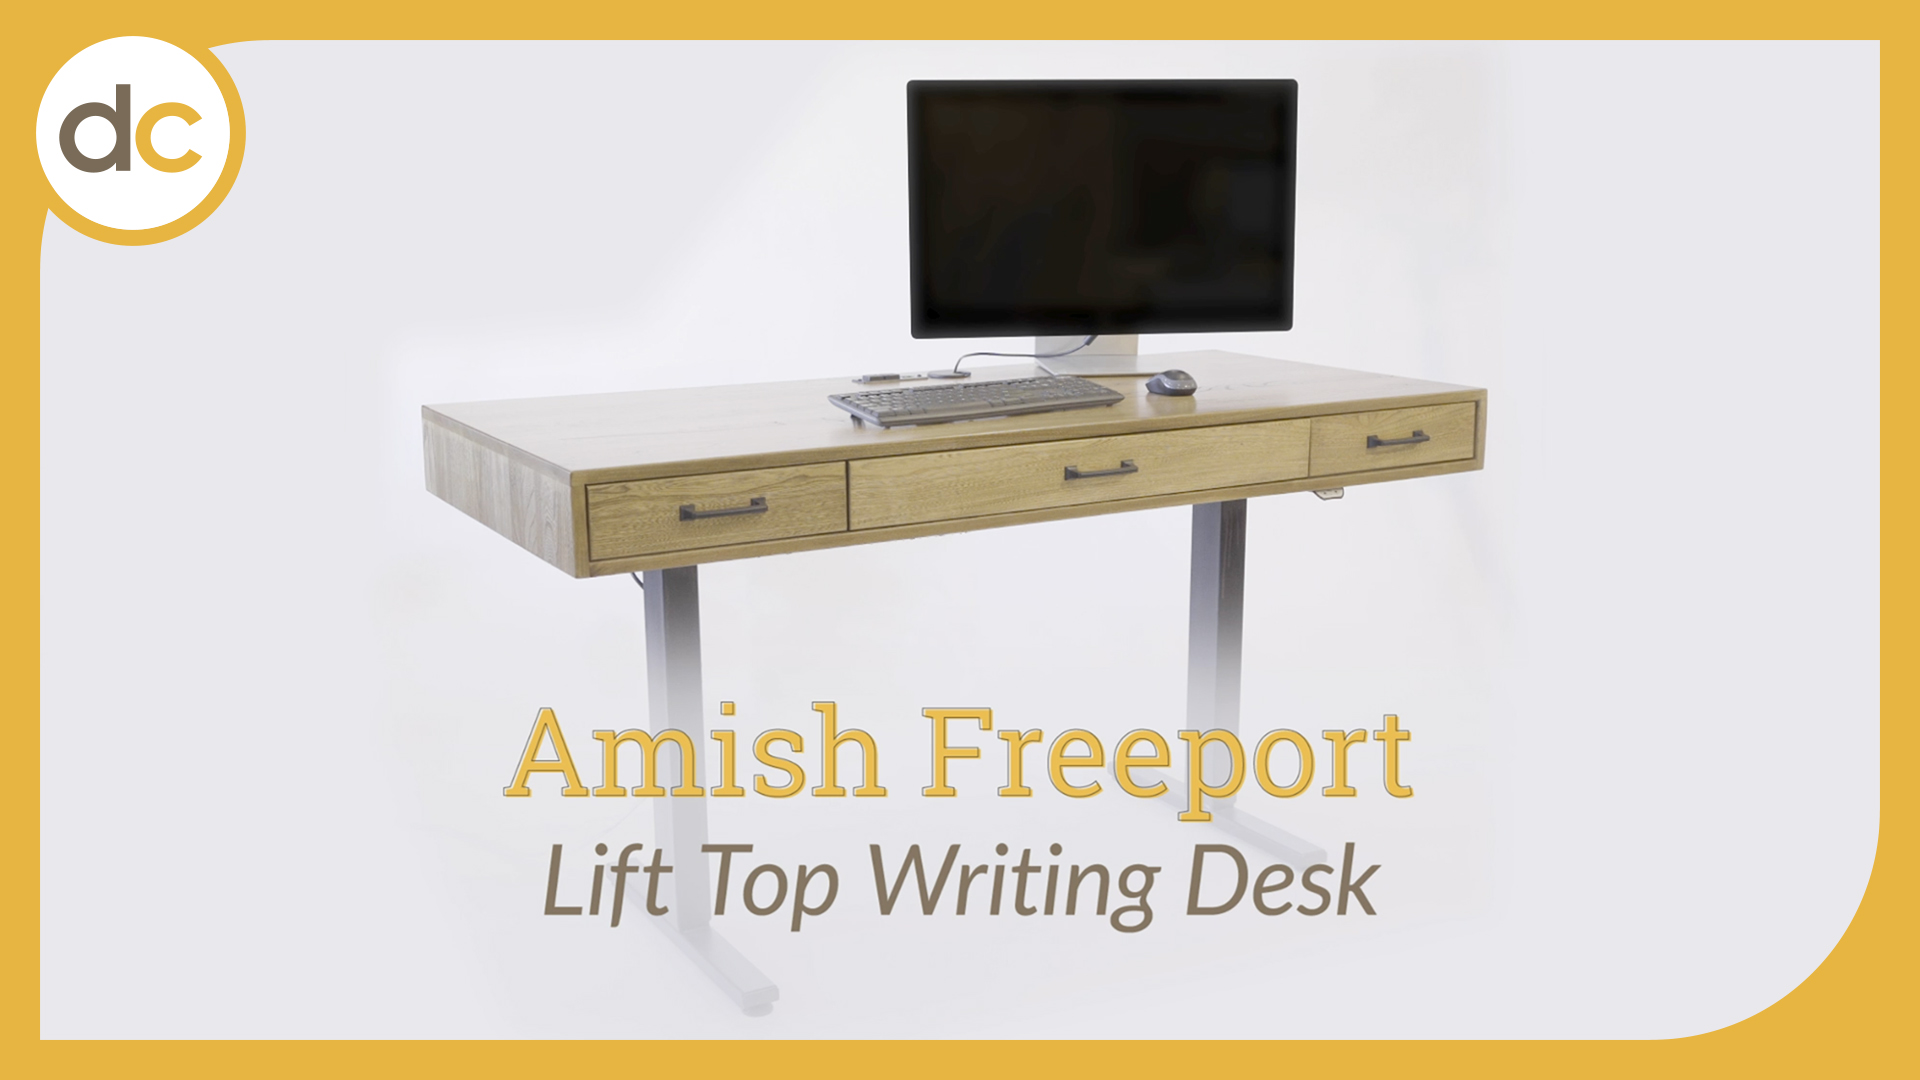 Video title image with the title Amish Freeport Lift Top Writing Desk over an image of the desk